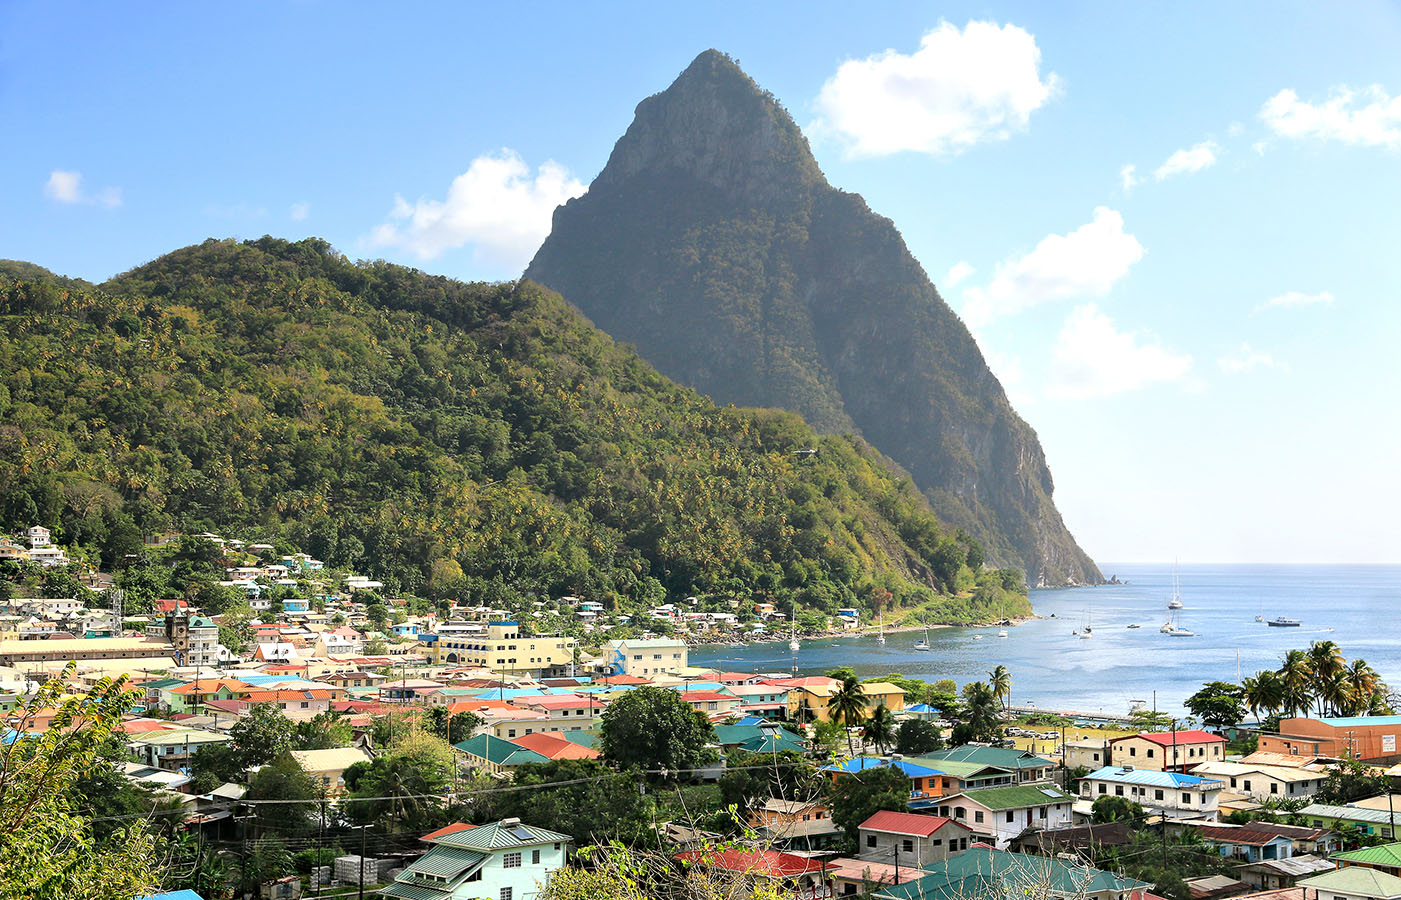 Aerial view of the small town Soufriere in Saint Lucia with The Pitons in the distance